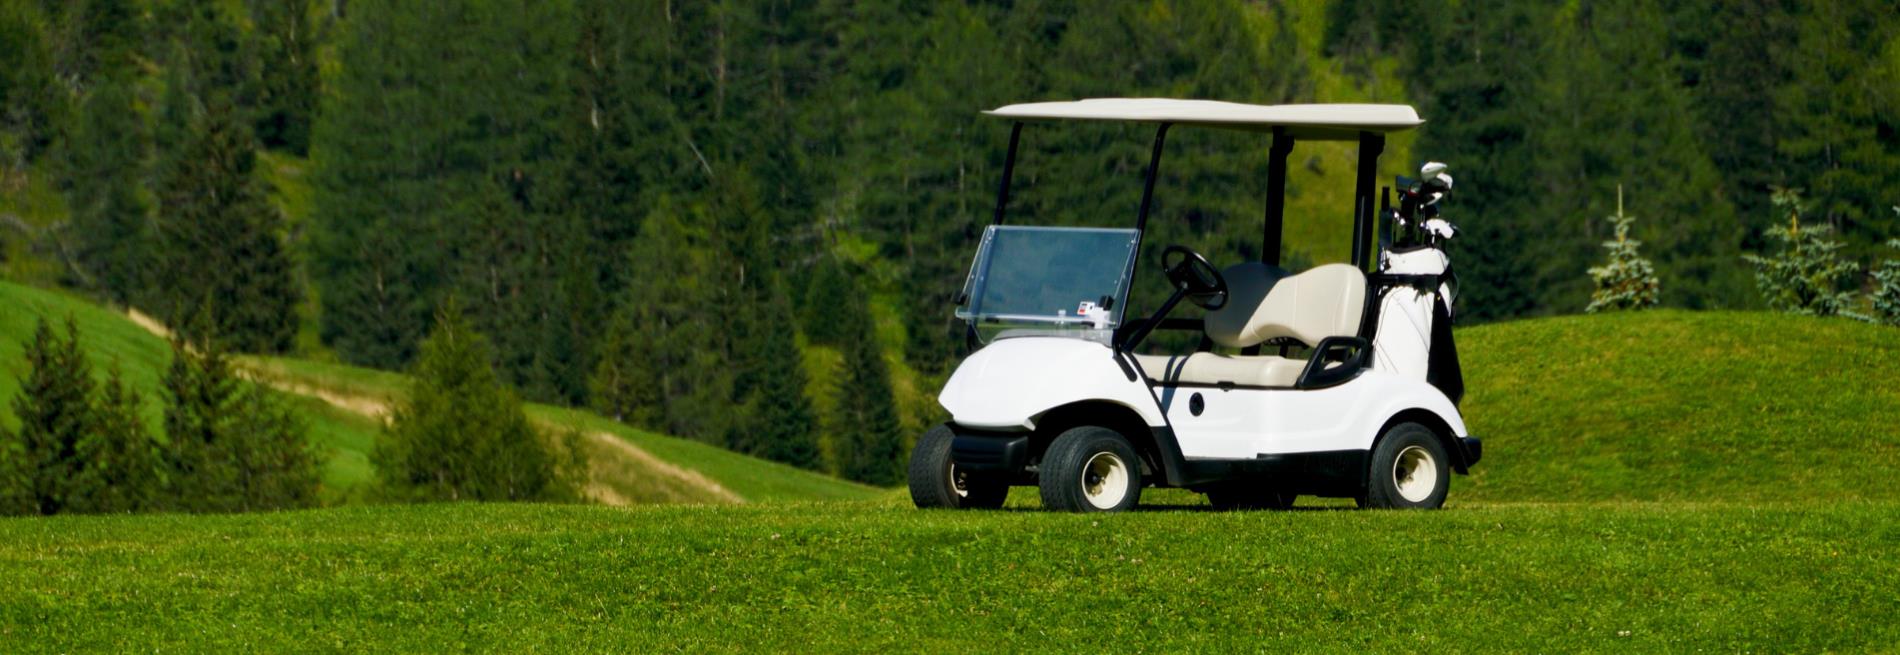 banner-golf-car-nuove-usate-luglio-000.png